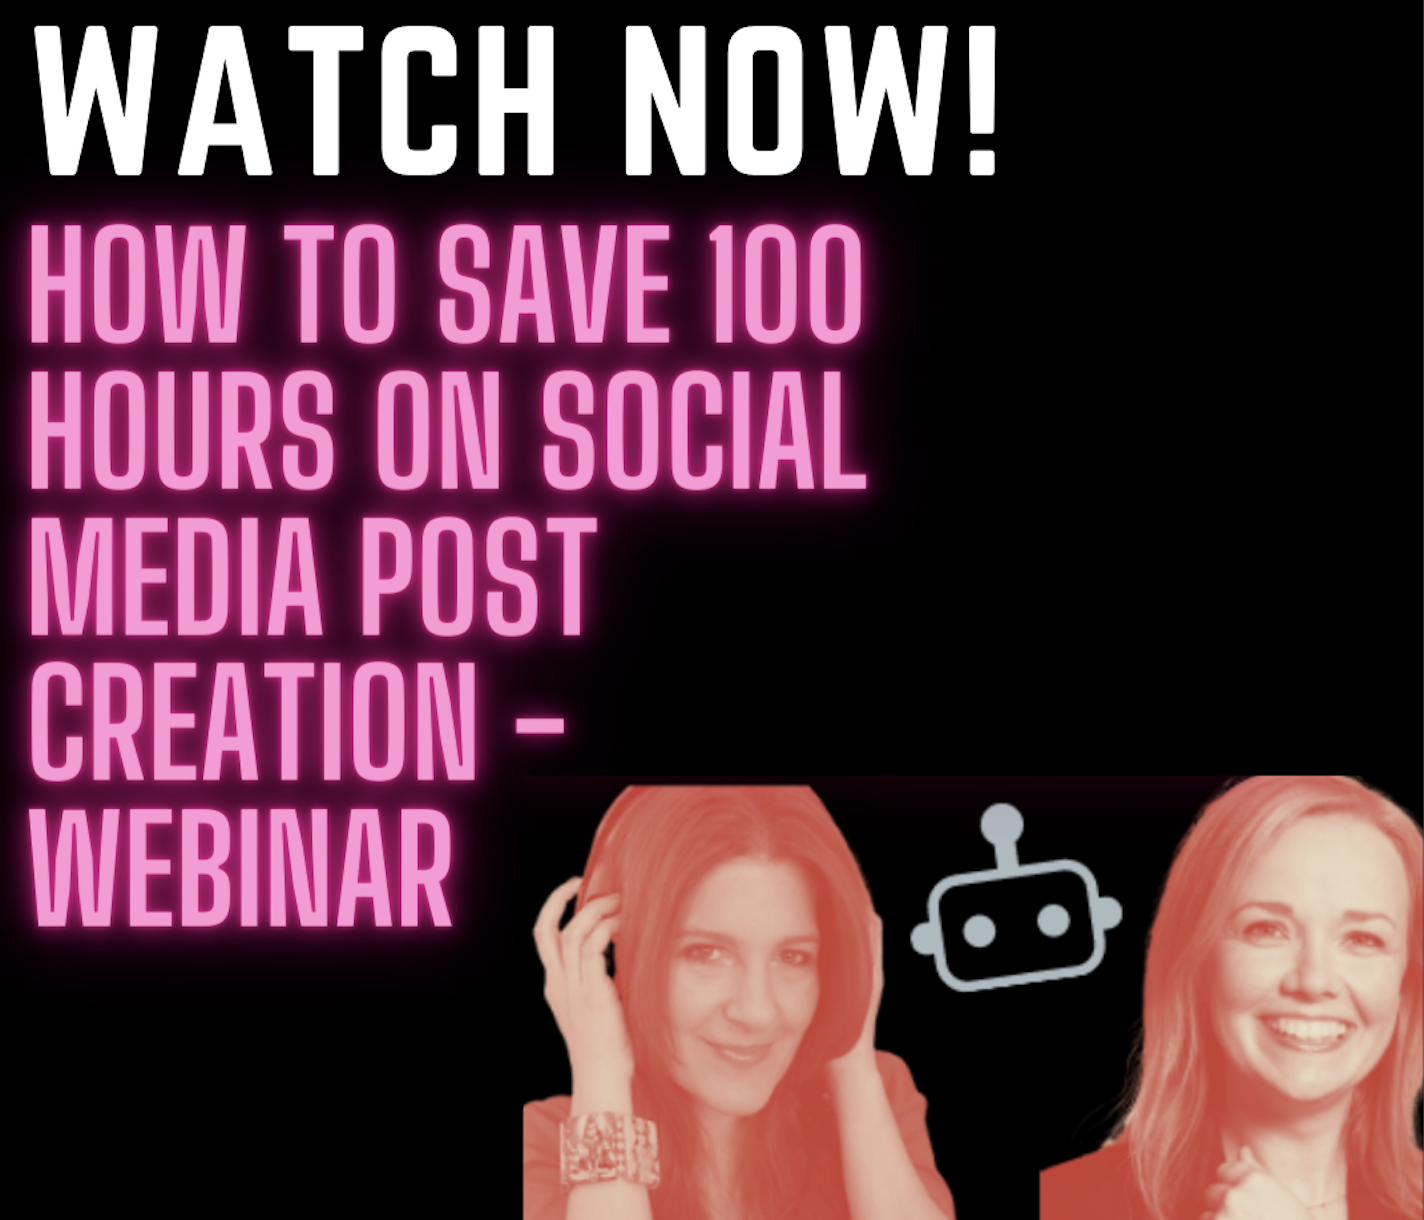 Watch: How to Save 100 Hours on Social Media Post Creation – Webinar